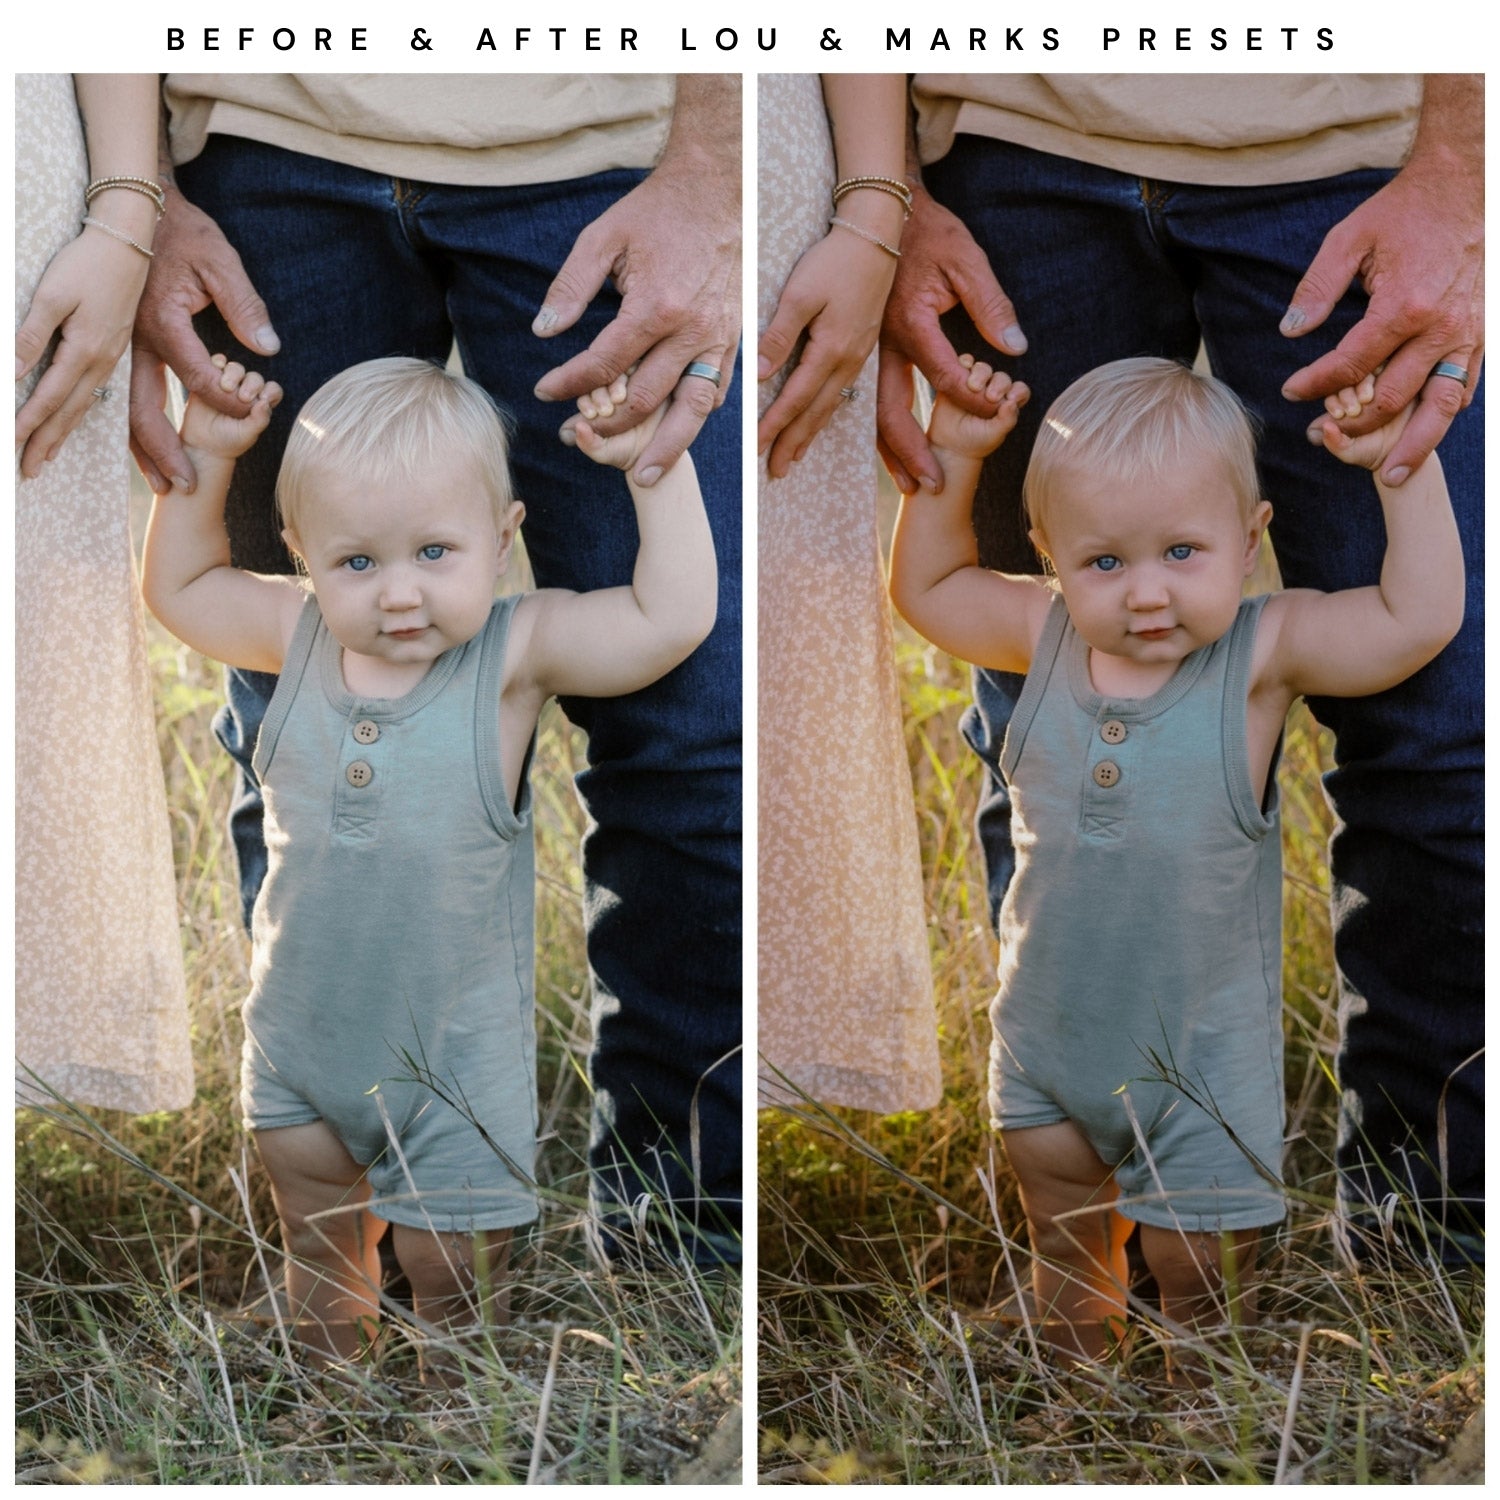 Lou And Marks Presets Moody Lightroom Presets Bundle The Best Moody Presets Baby Newborn